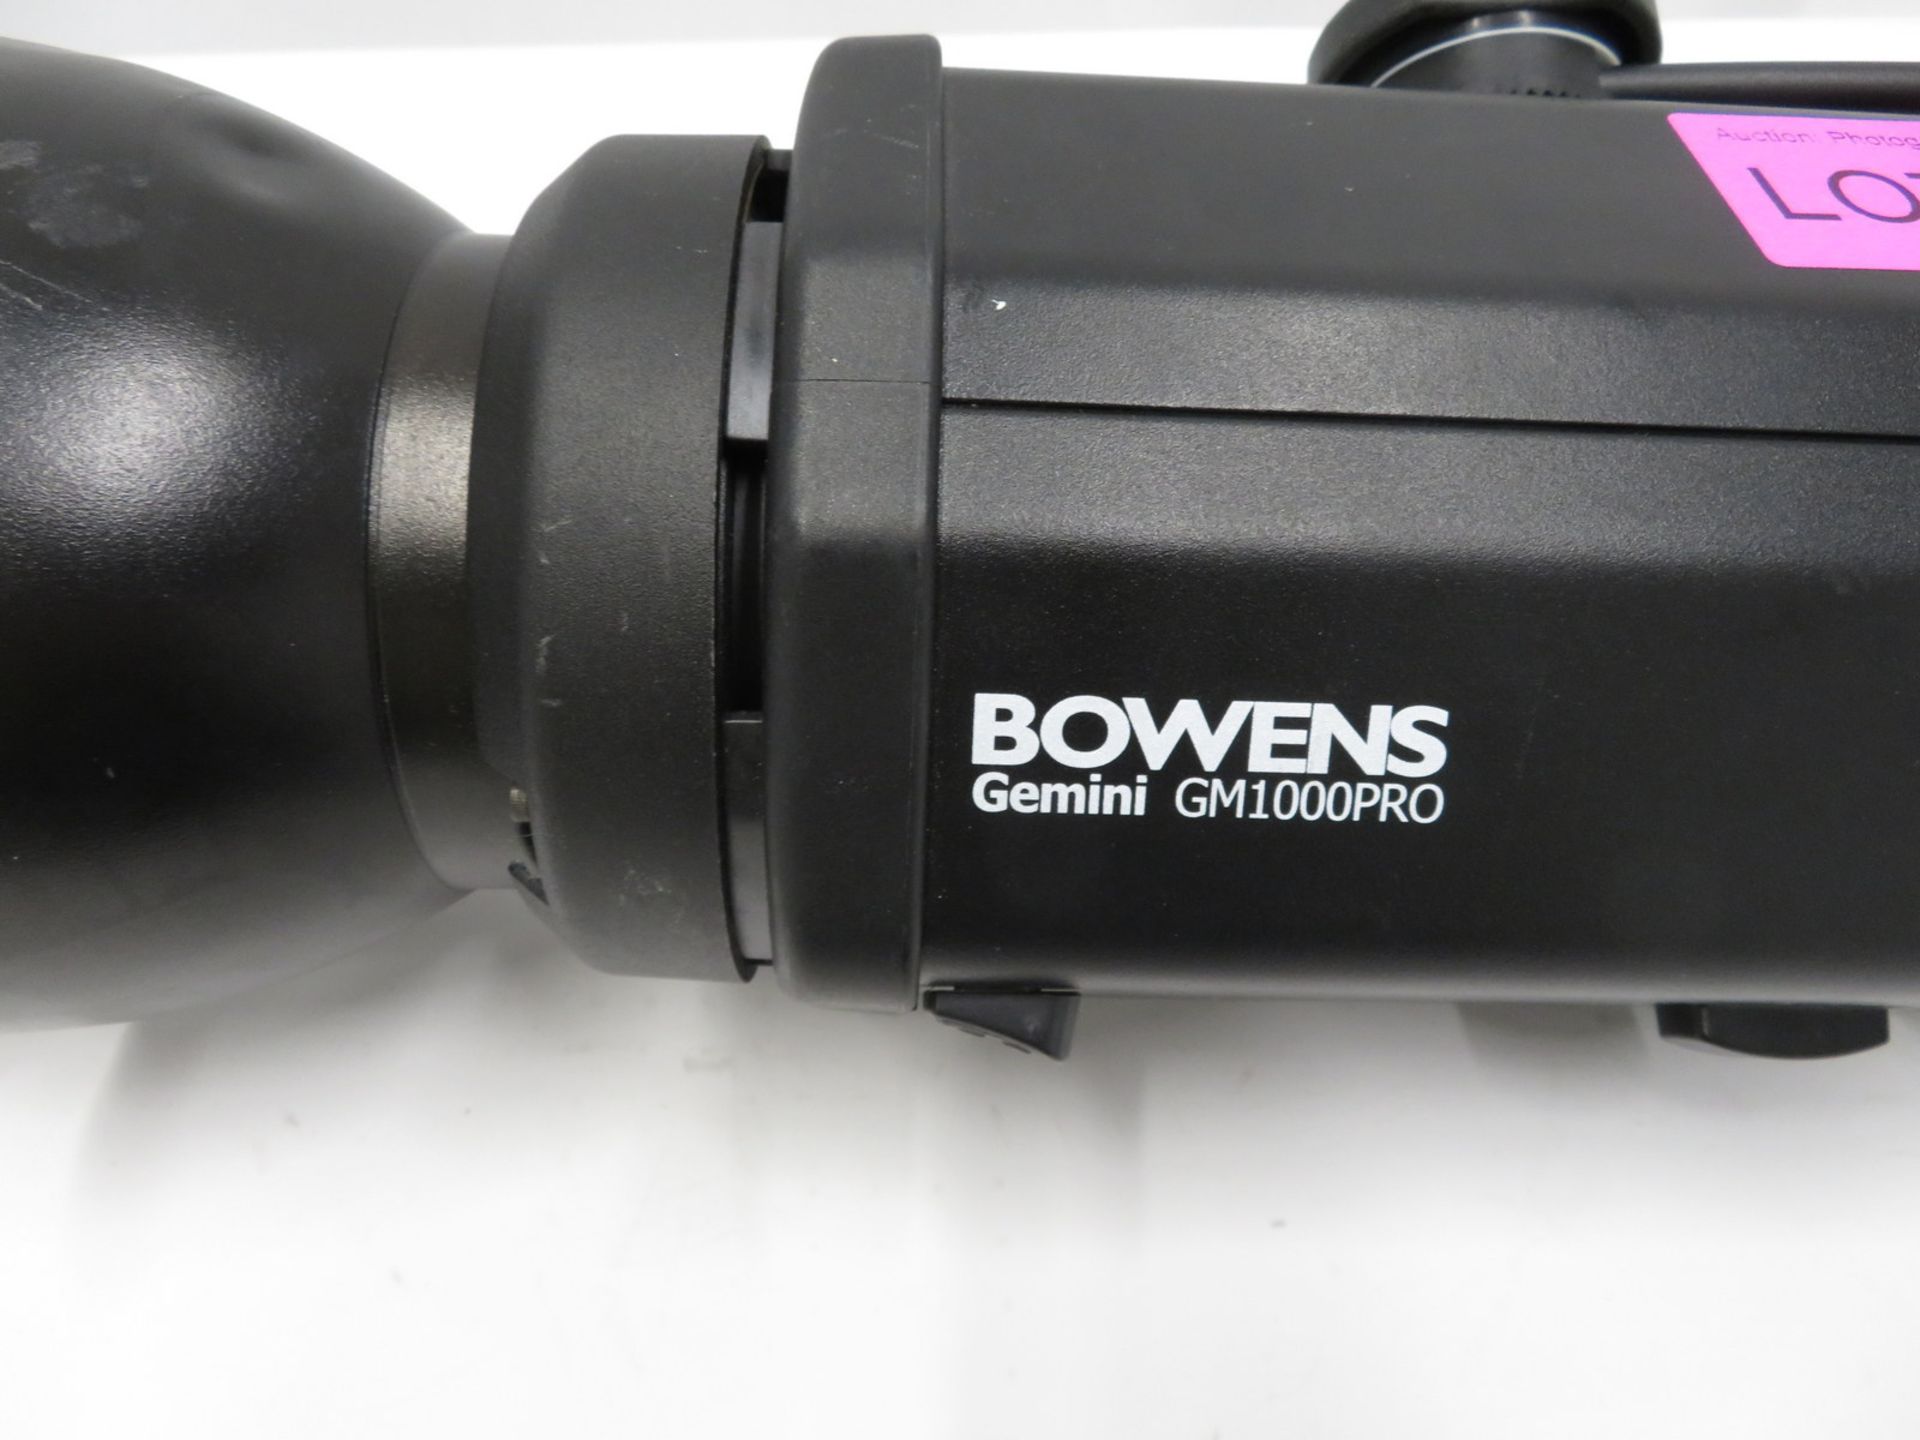 Bowens Gemini GM1000PRO studio light with cables - Image 3 of 7